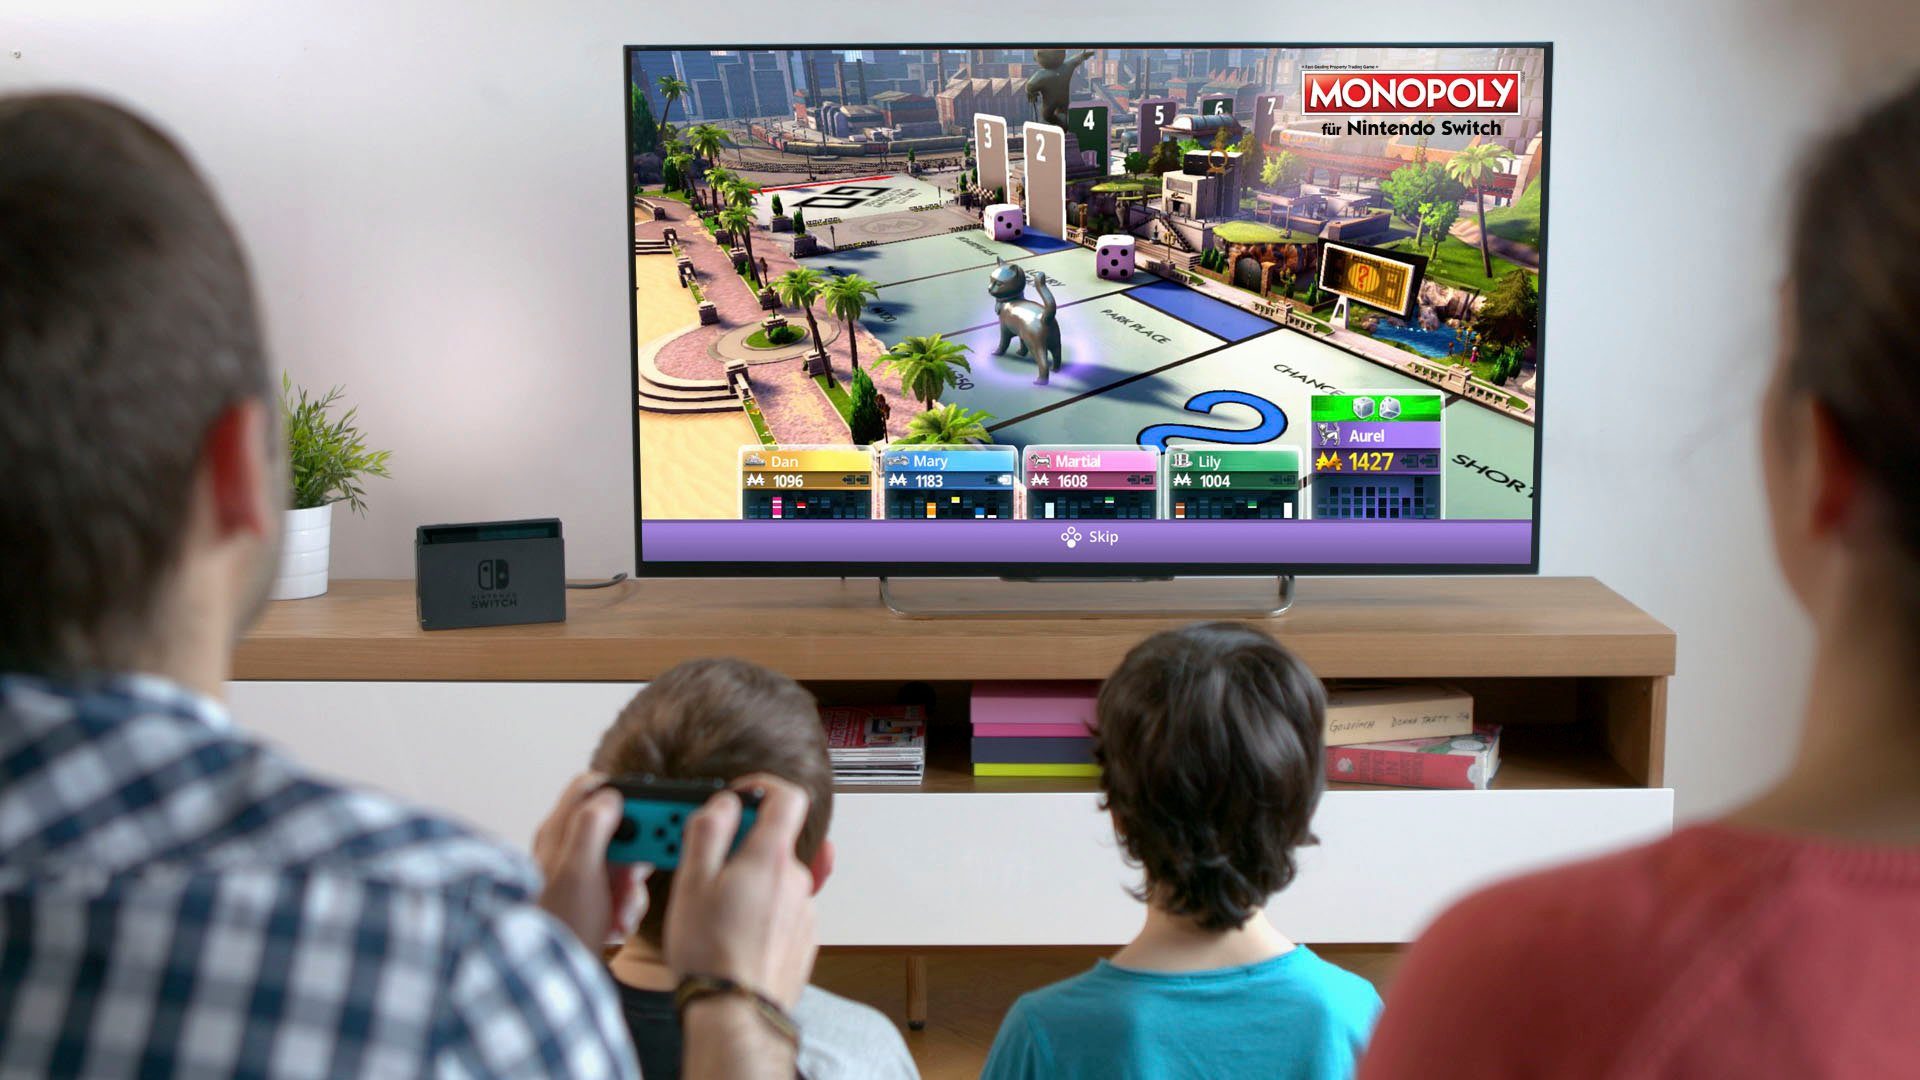 Switch BOX) THE (CODE UBISOFT MONOPOLY IN Nintendo